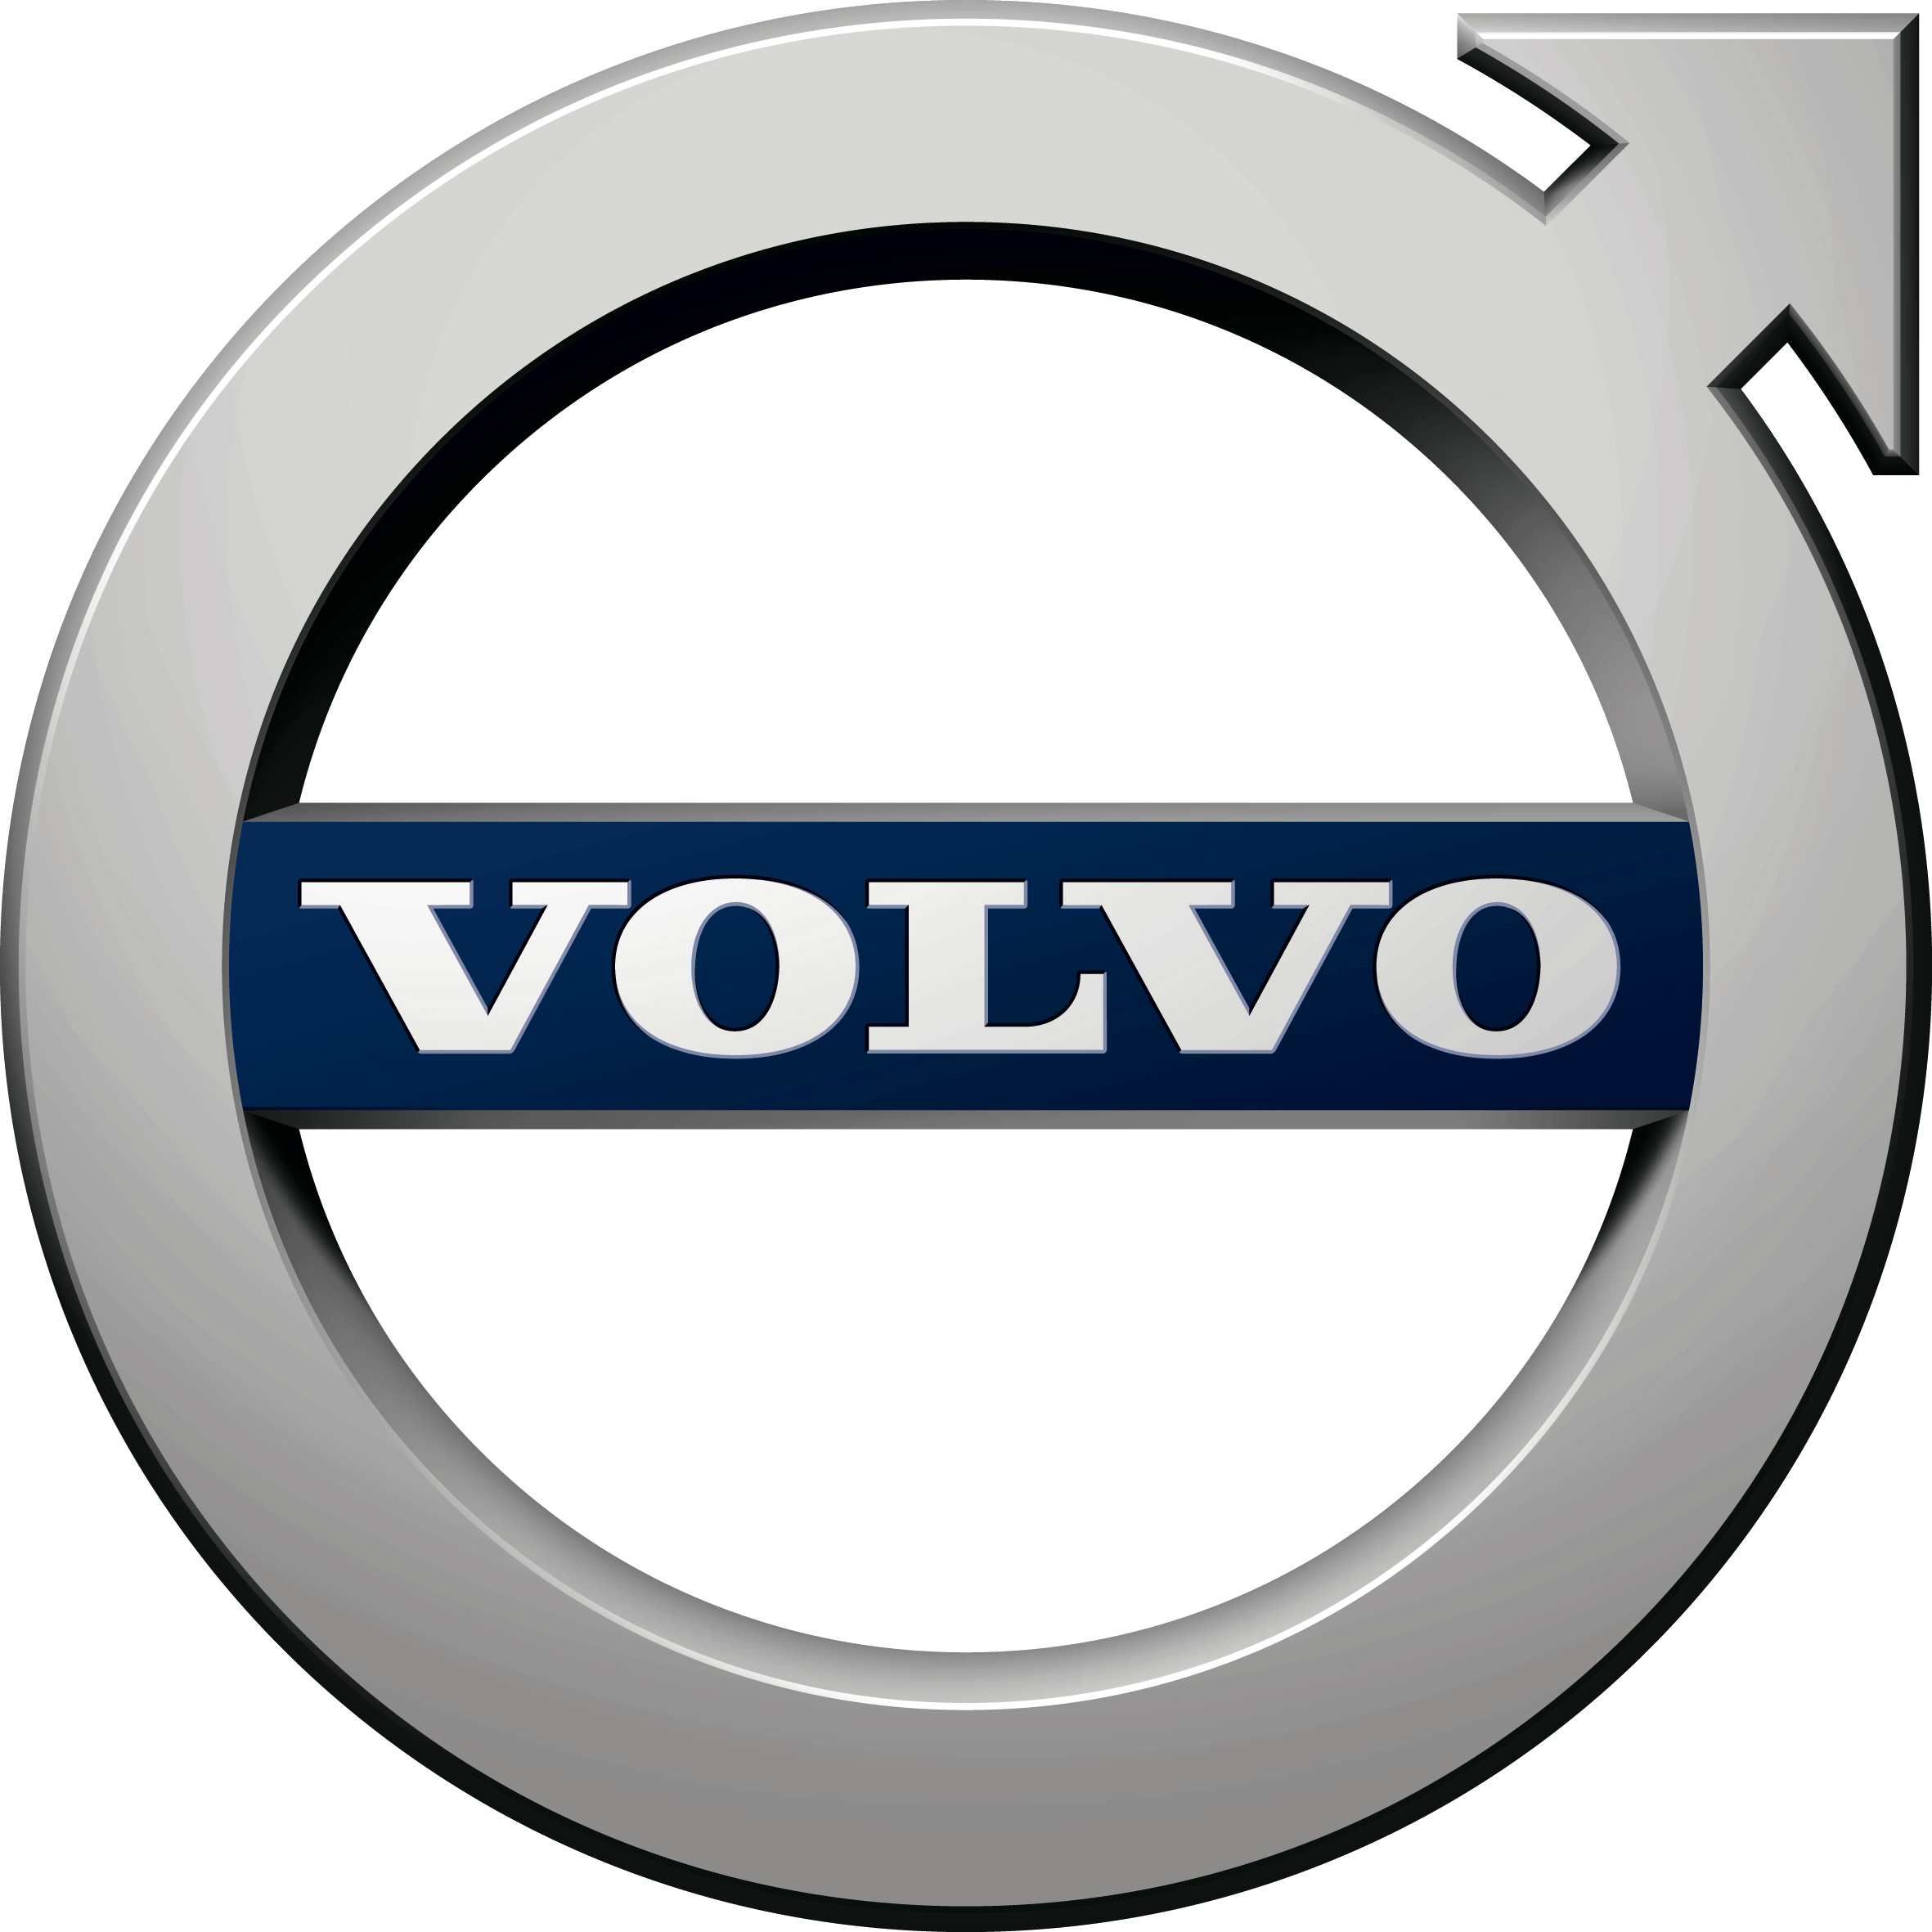 Foreign Auto Logo - Volvo | Henry's Auto – Foreign Auto Service and Sales near Medford ...